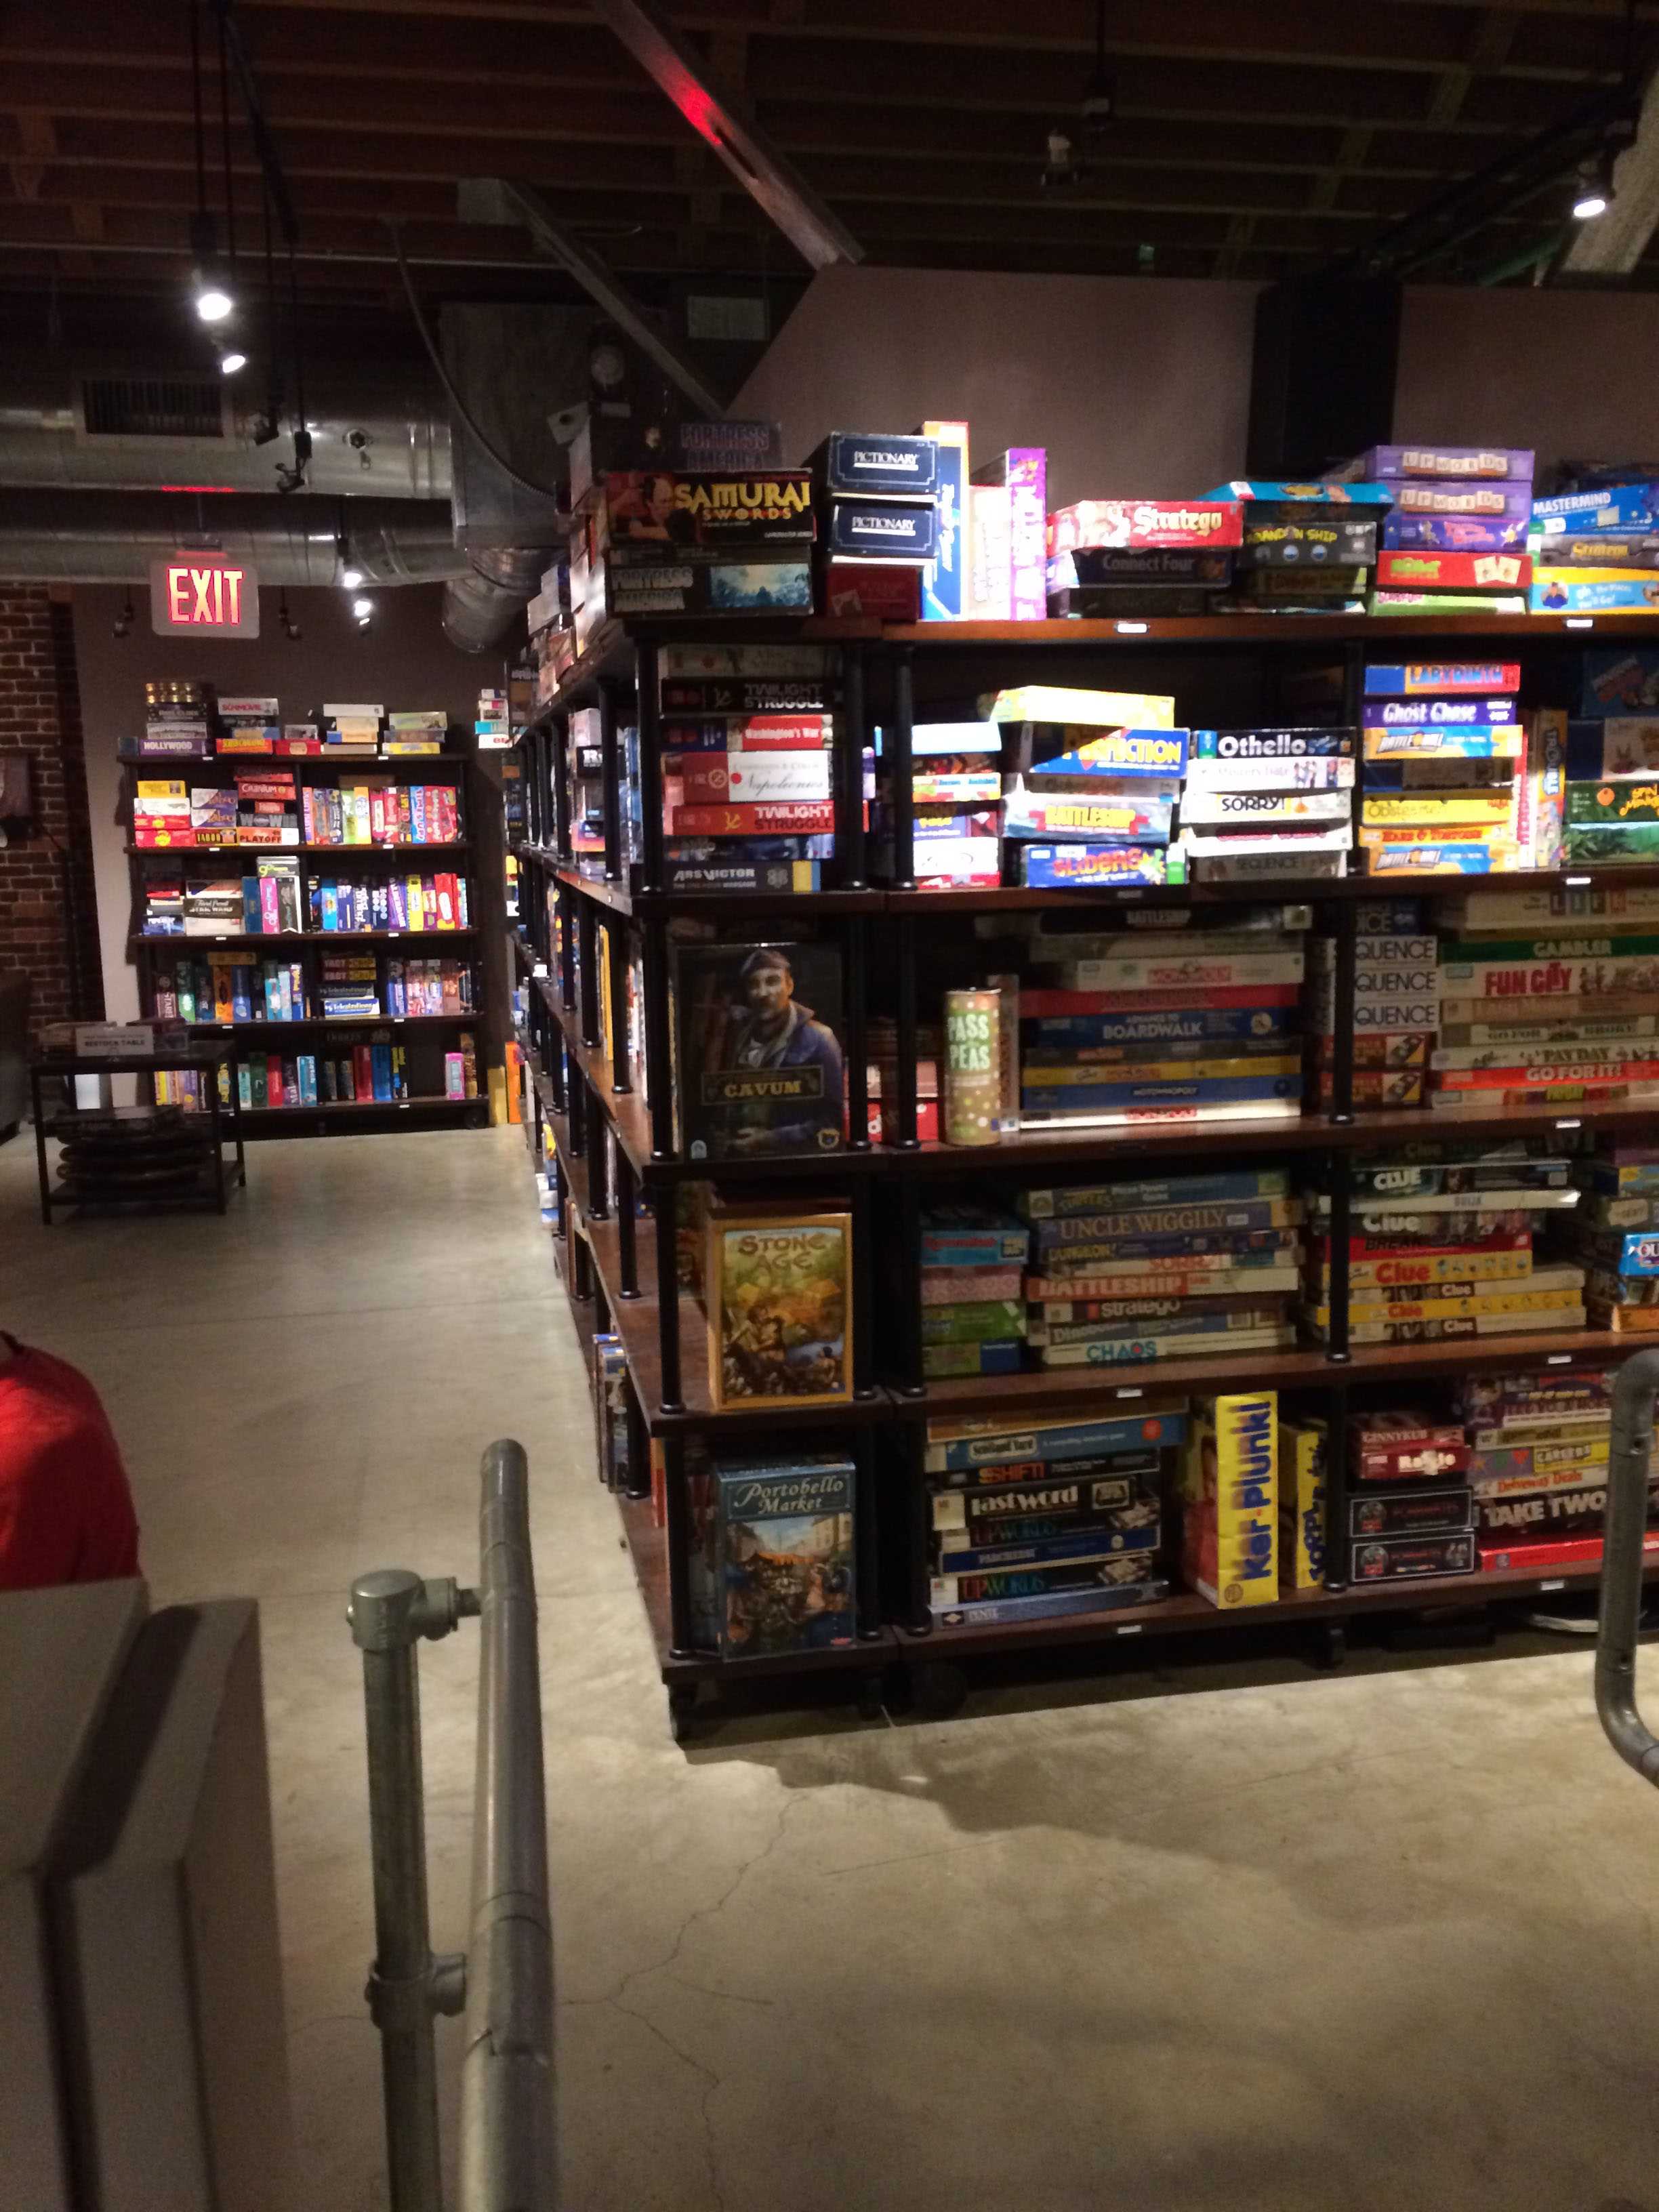 The café has a collection of over 900 games for visitors to keep themselves entertained for countless hours.